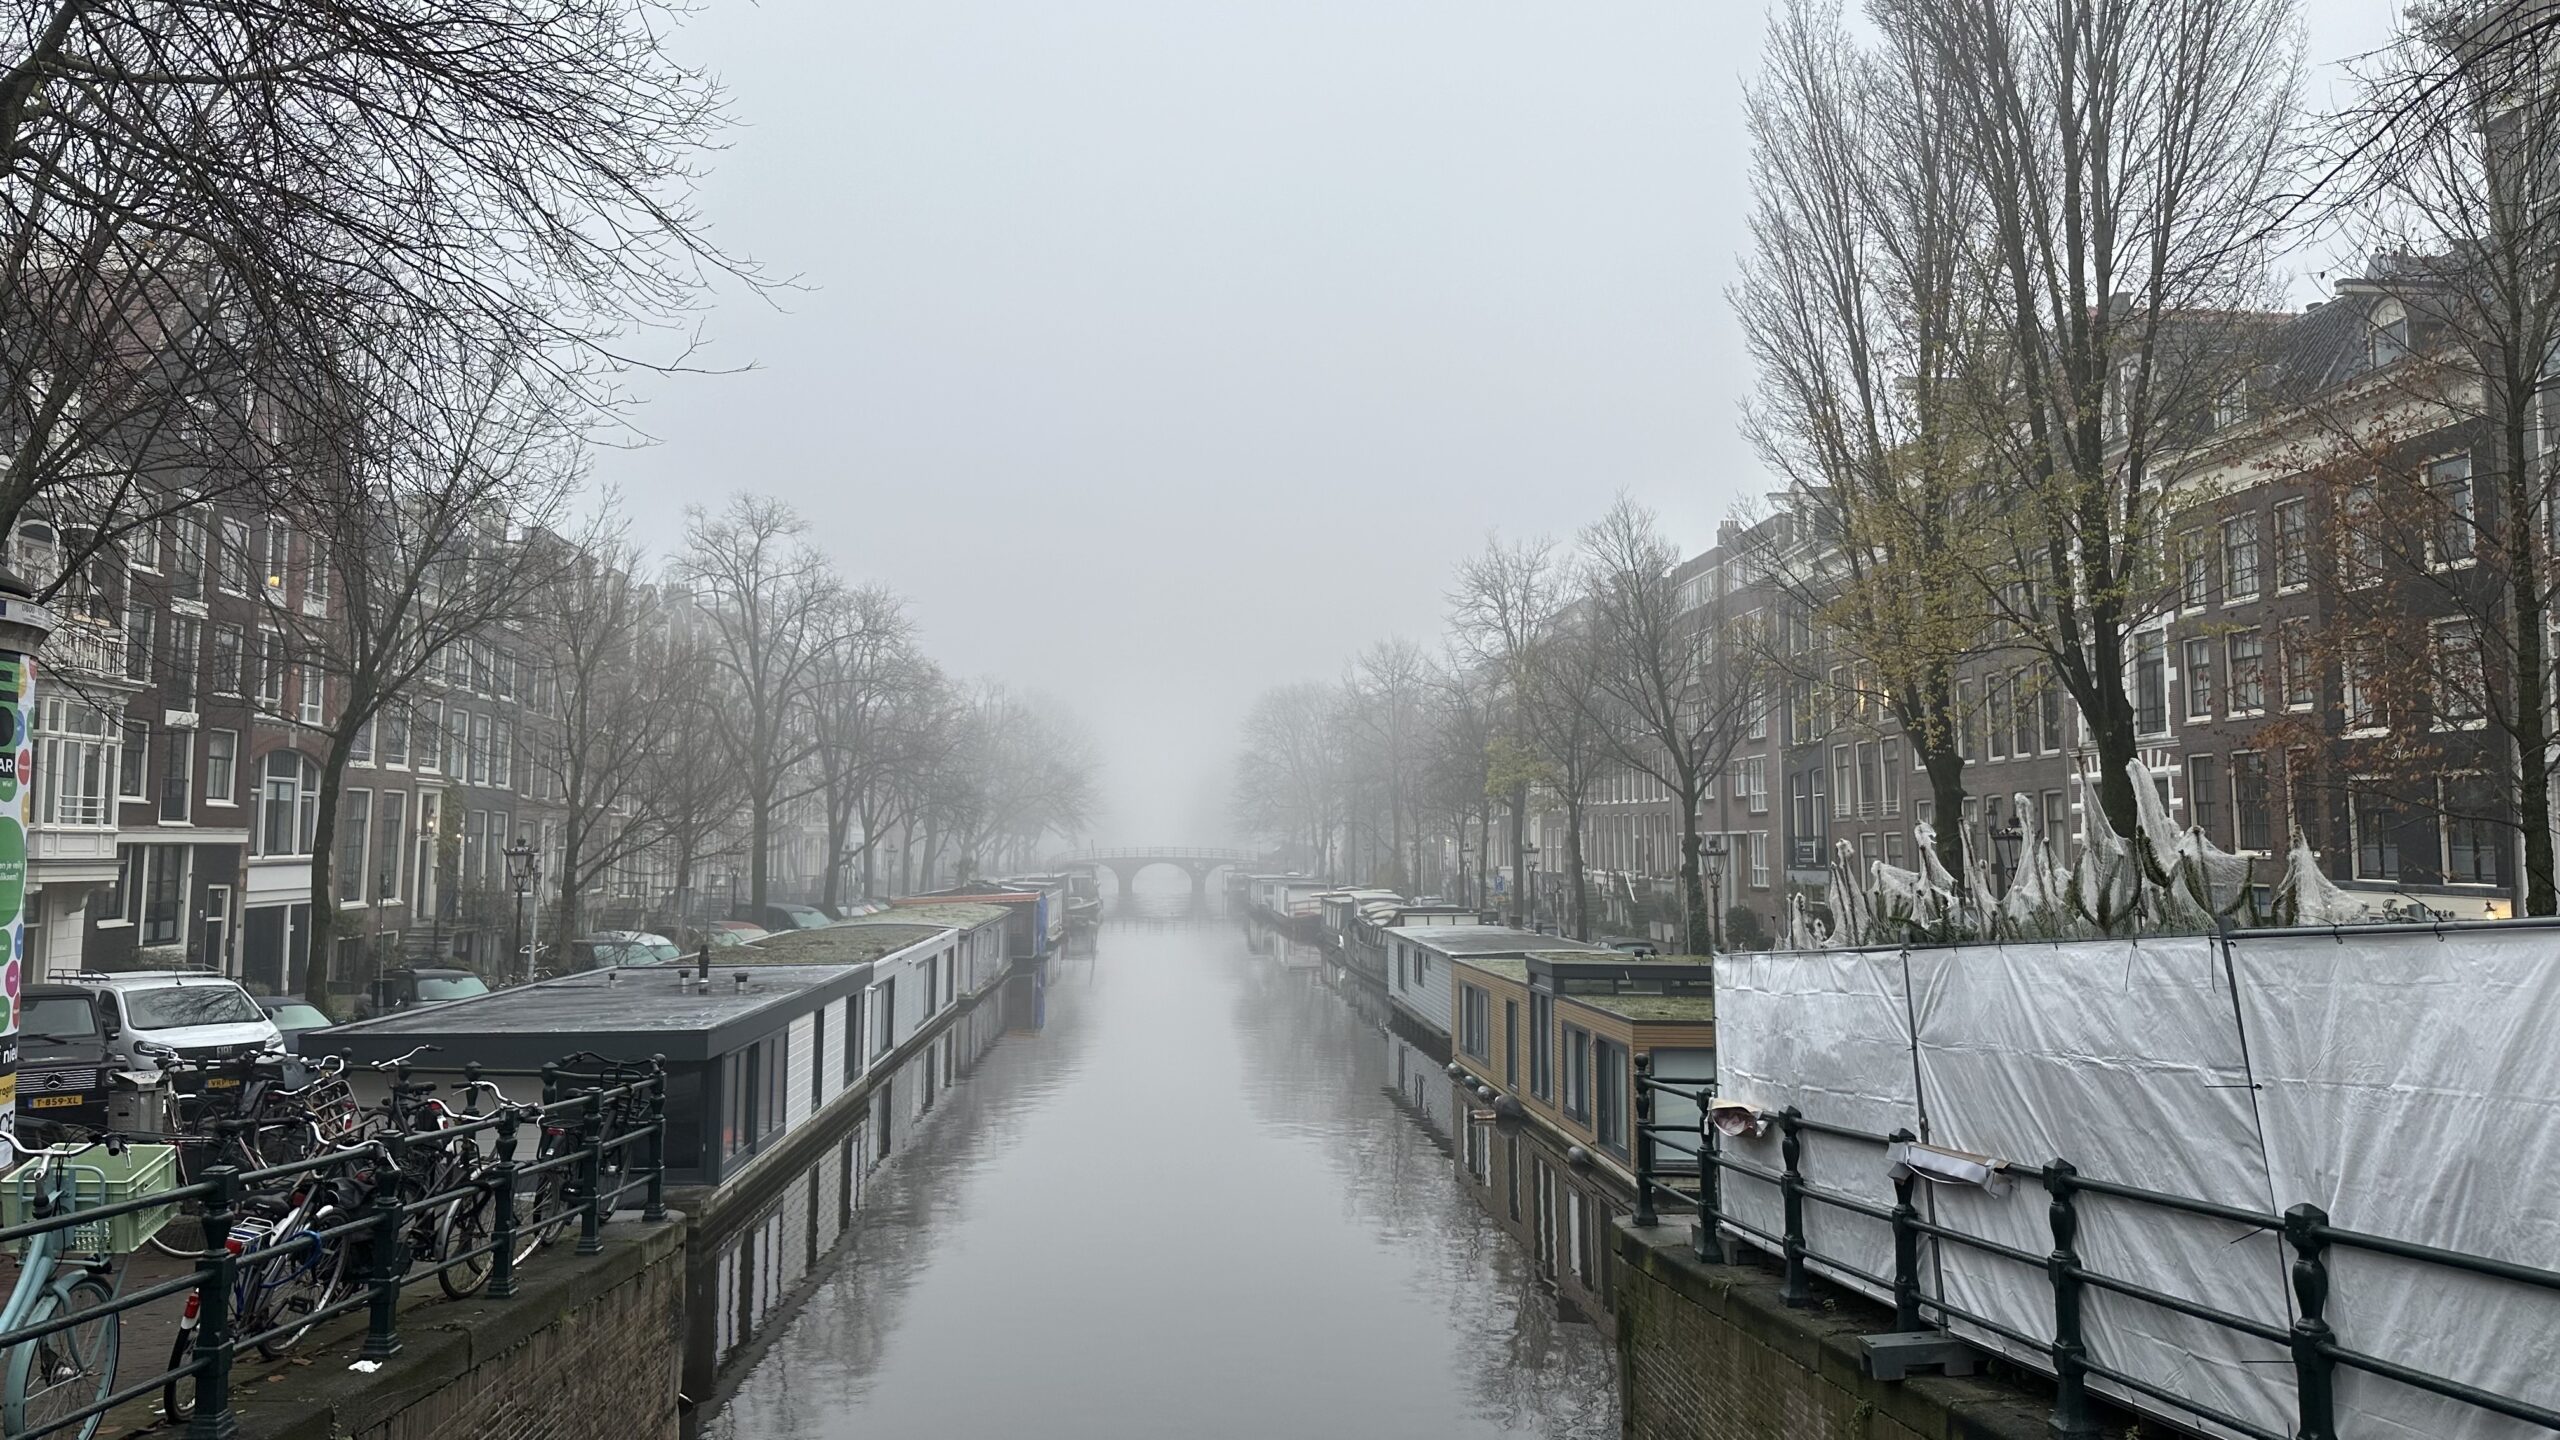 View down an Amsterdam canal on a foggy morning. The canal is flanked by house boats, leafless trees, and narrow row houses.